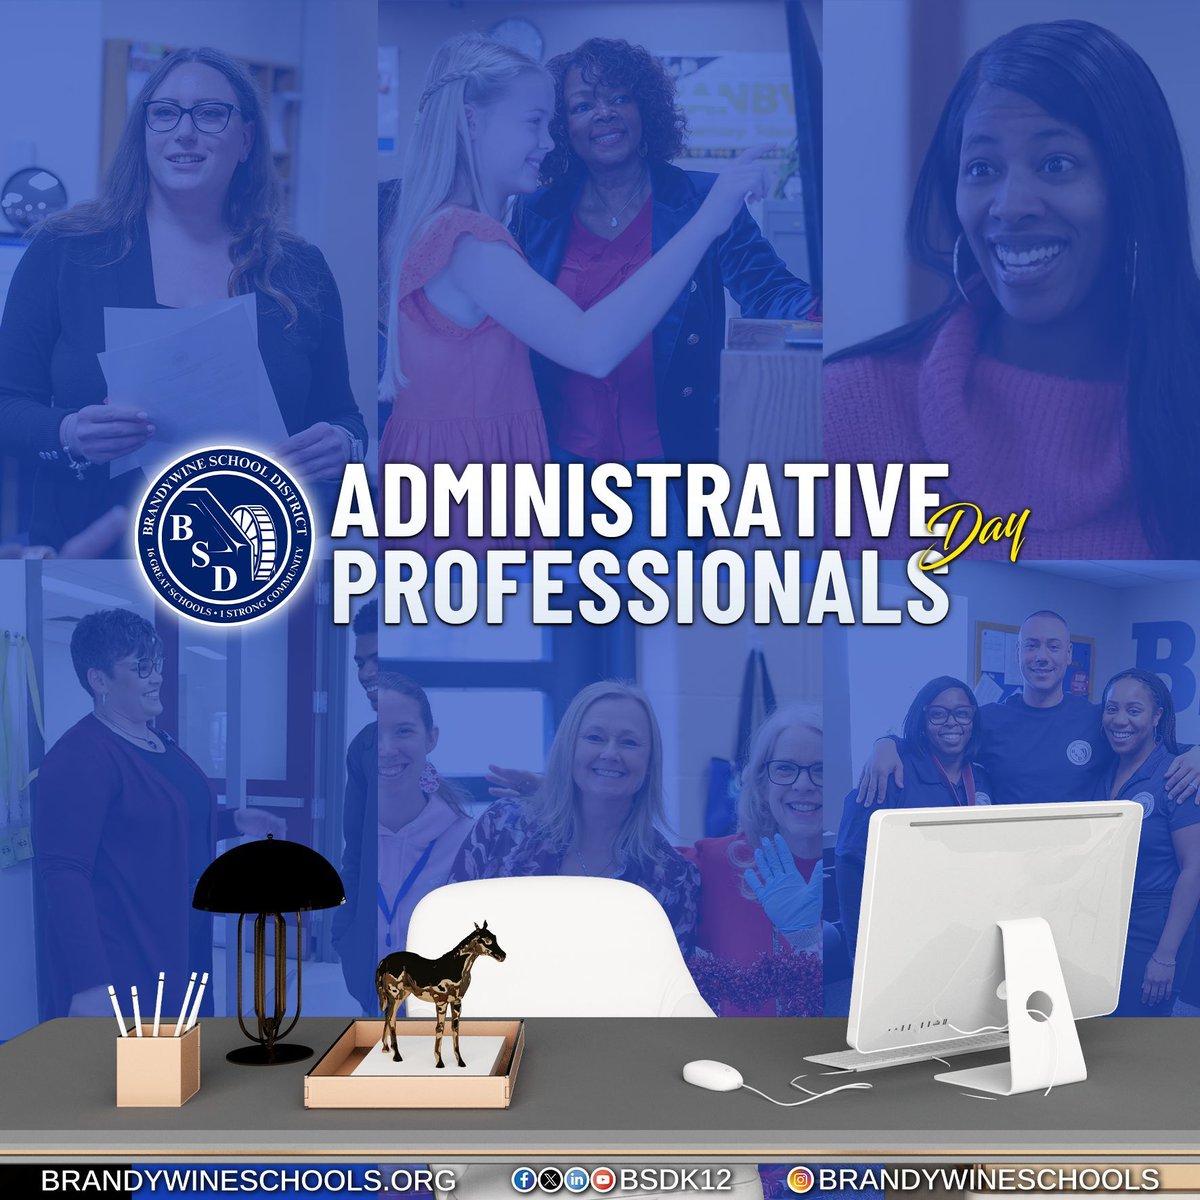 Today, we celebrate the incredible administrative staff across BSD who keep our schools running smoothly every day. From managing schedules to supporting students and staff, their hard work behind the scenes helps our buildings run. #Proud2bBSD #StrongSchoolsStrongCommunity